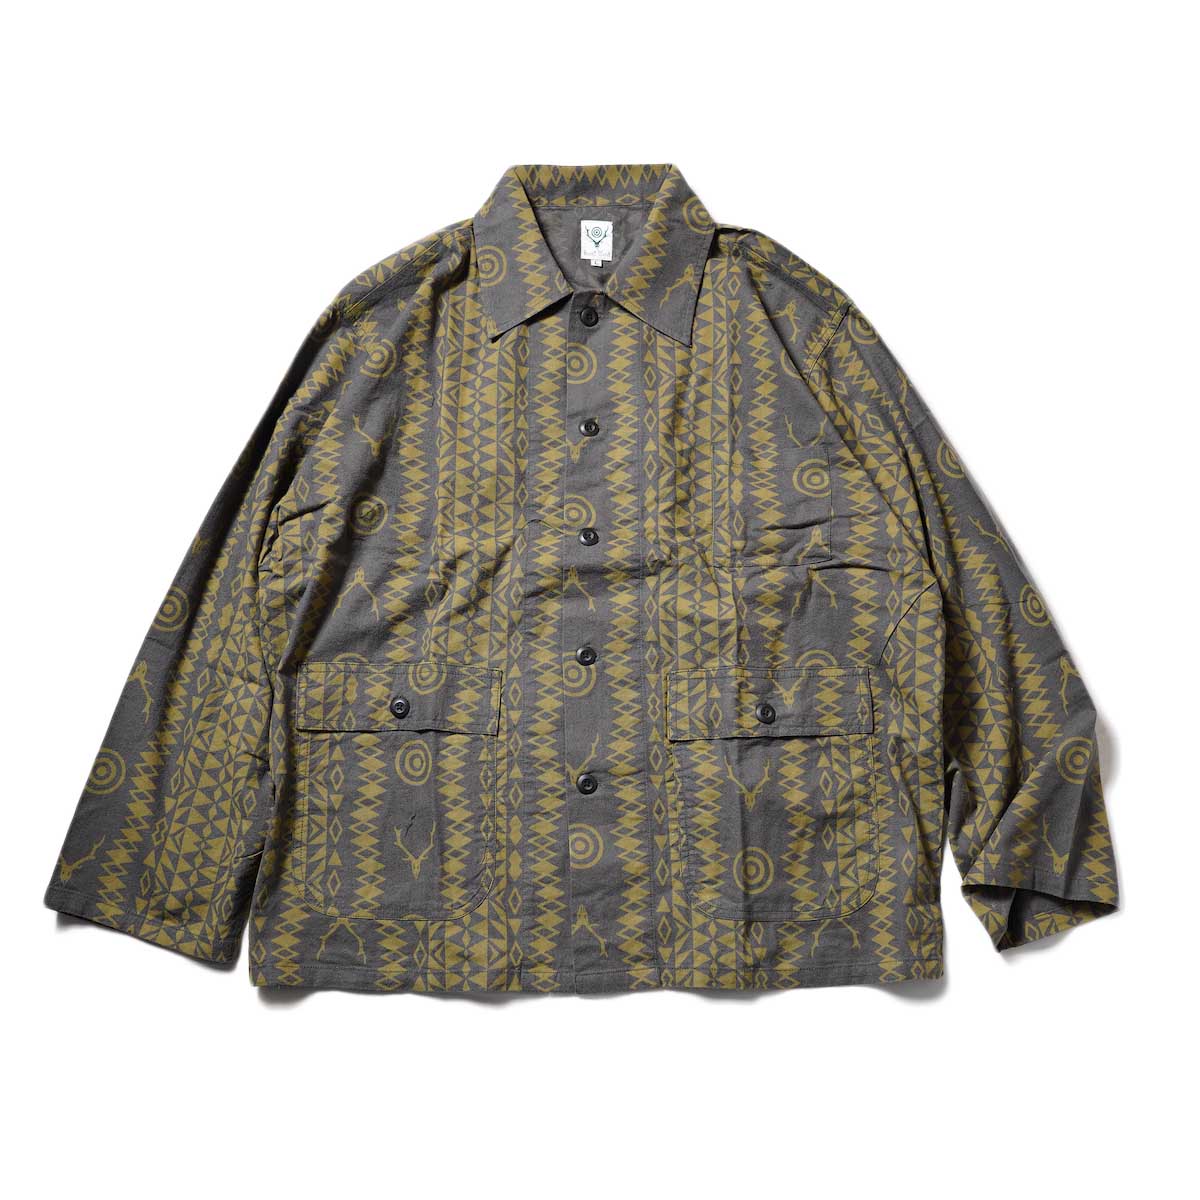 South2 West8 / HUNTING SHIRT - FLANNEL PT. (Skull&Target)正面